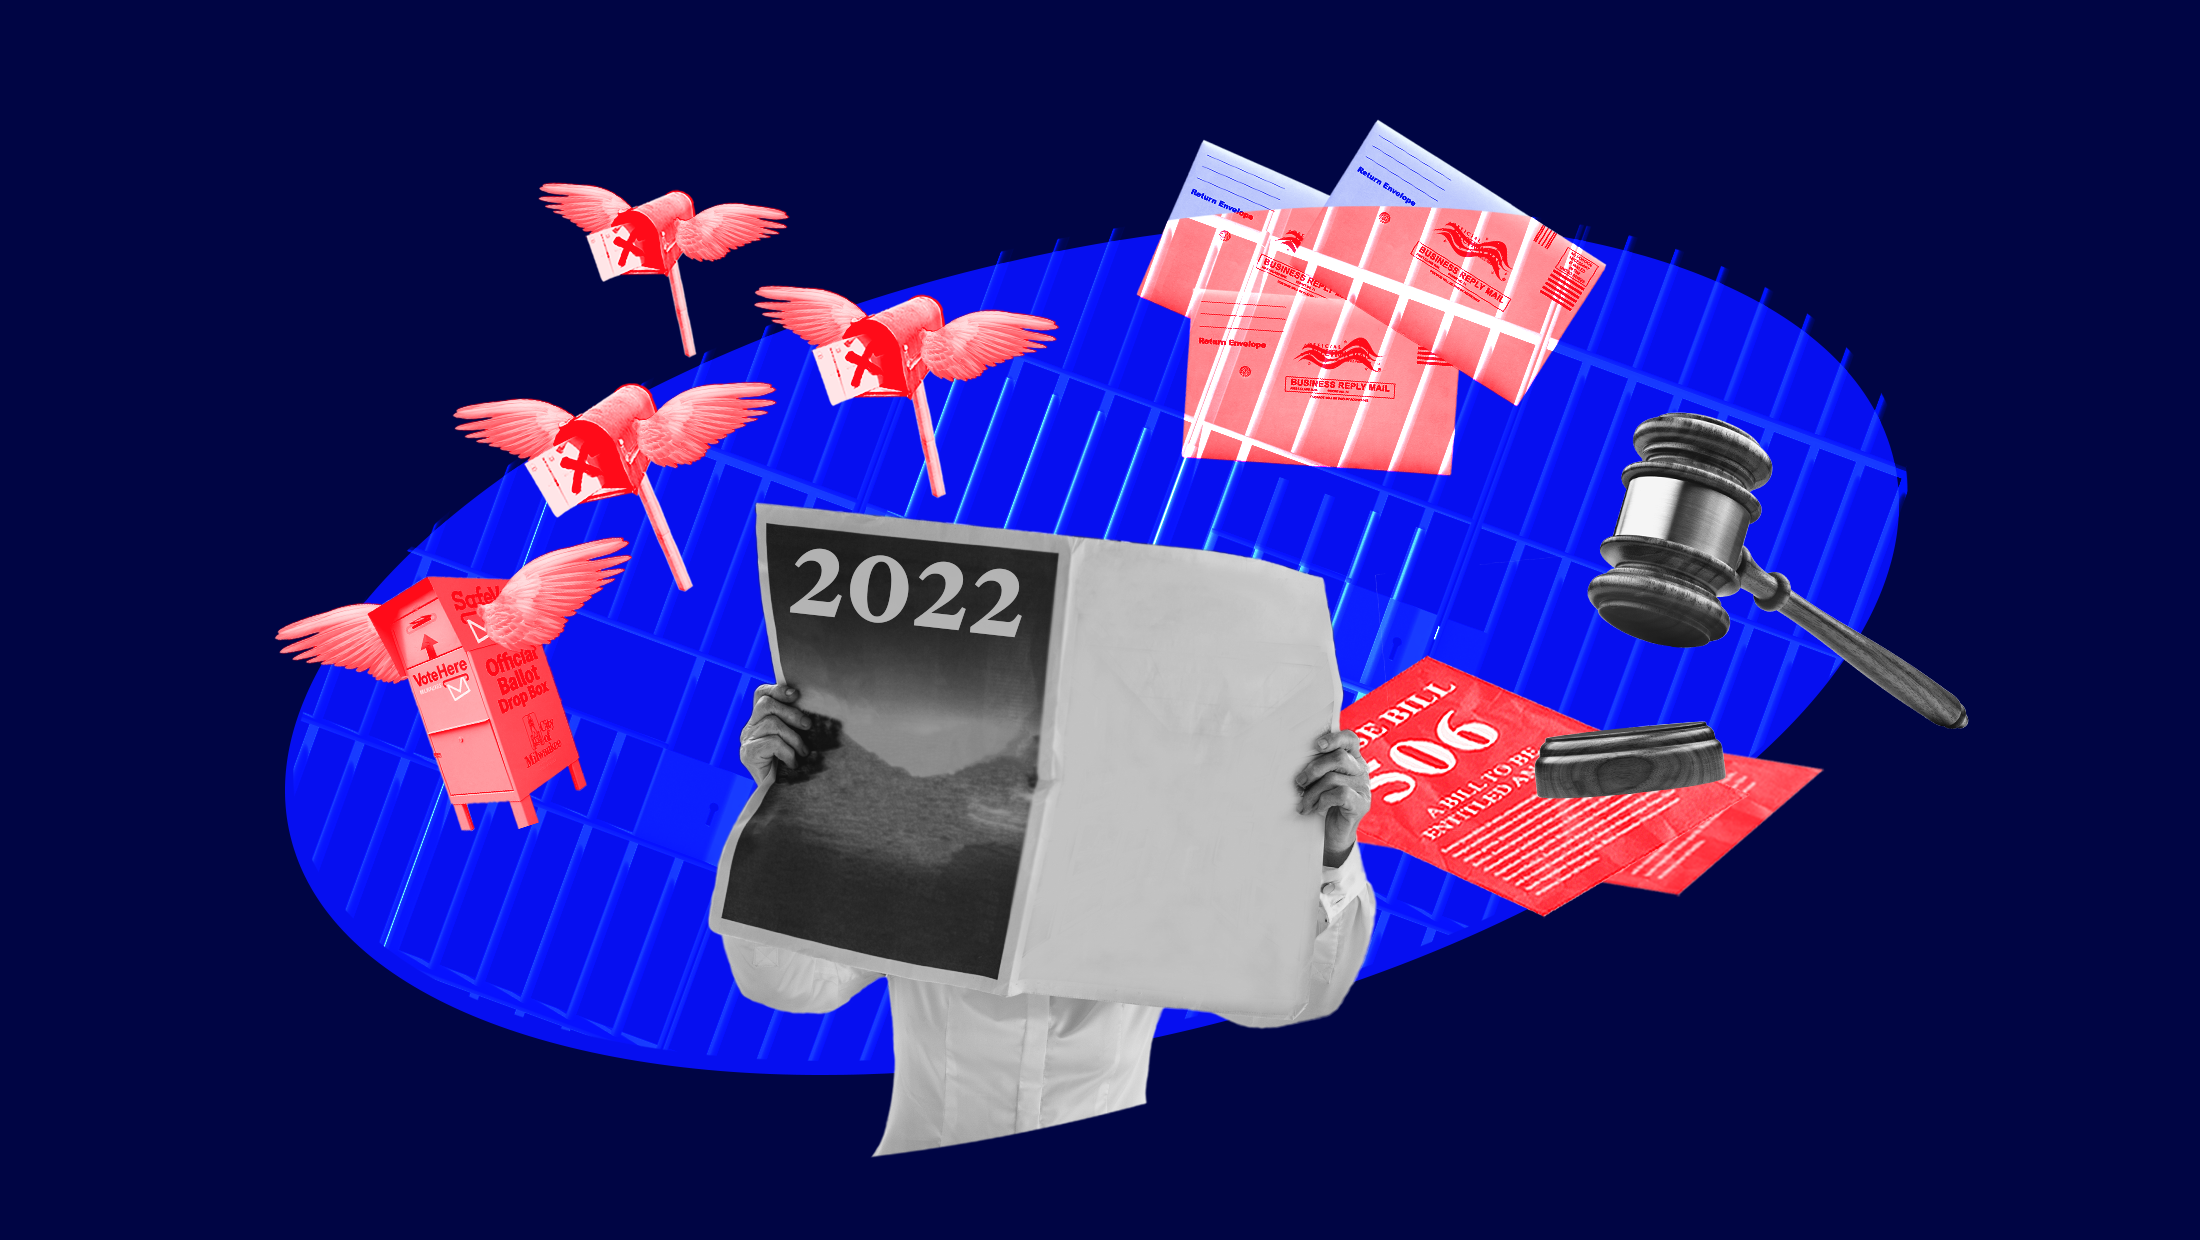 A collage on a dark blue background with a lighter blue oval featuring mail boxes with wings, mail-in ballot envelopes, a gavel, the text of a bill and someone holding up a newspaper with the cover title of "2022."